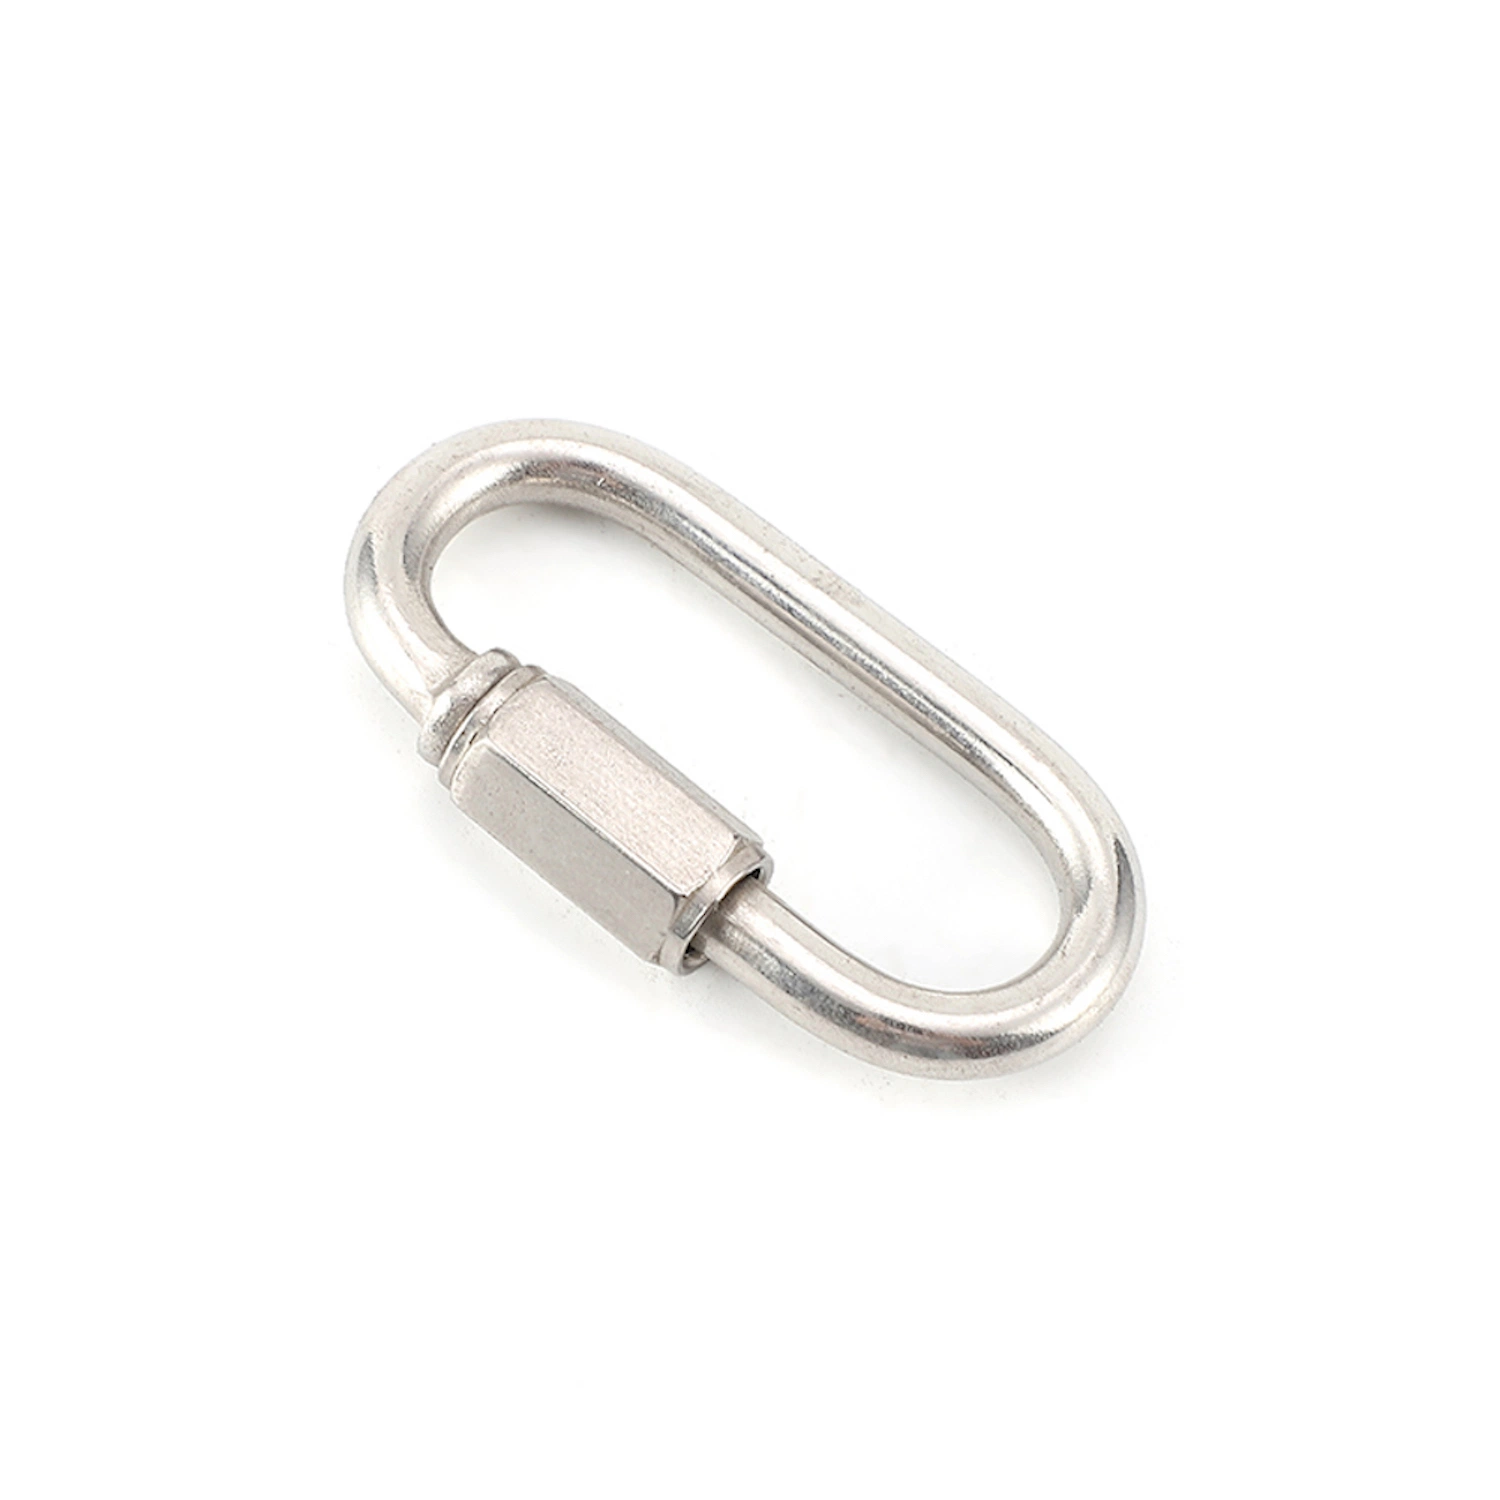 Stainless Steel Wire Rope Rigging Quick Link Hook